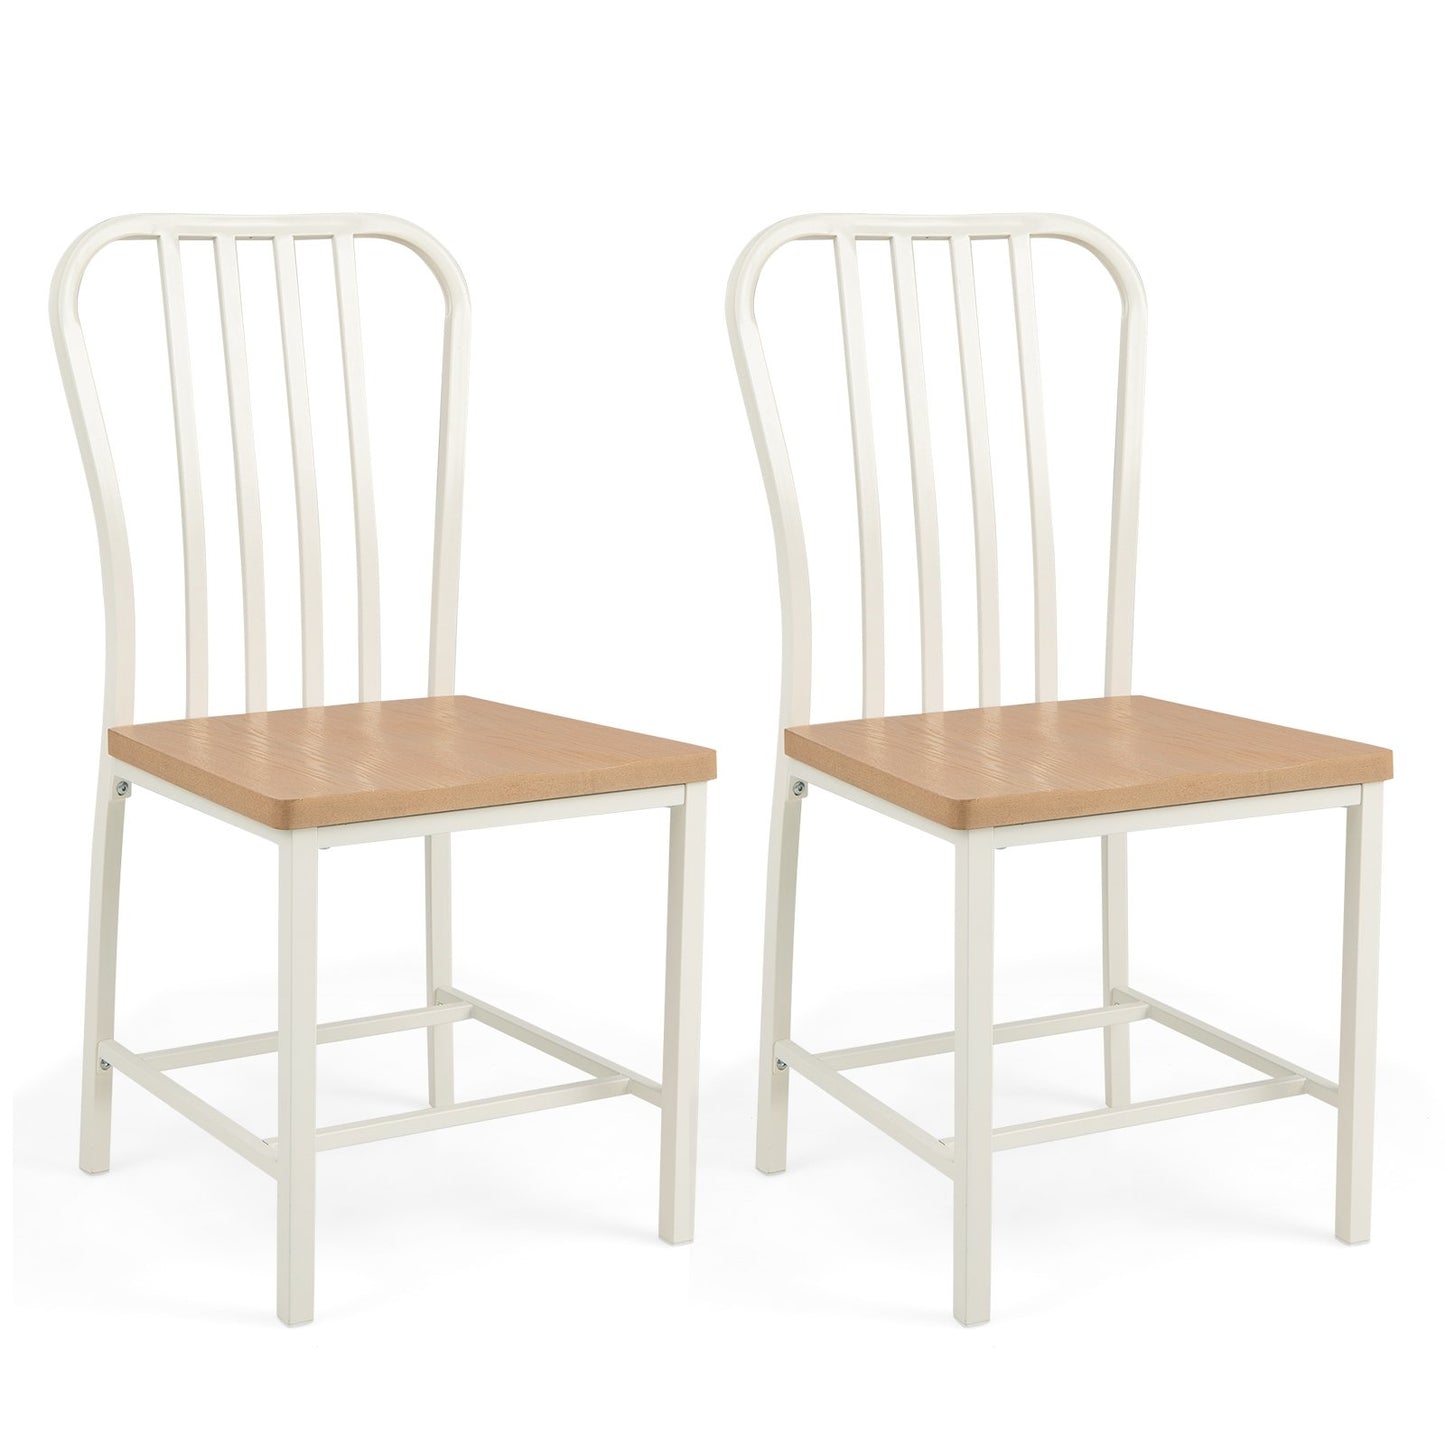 Armless Spindle Back Dining Chair Set of 2 with Ergonomic Seat, White